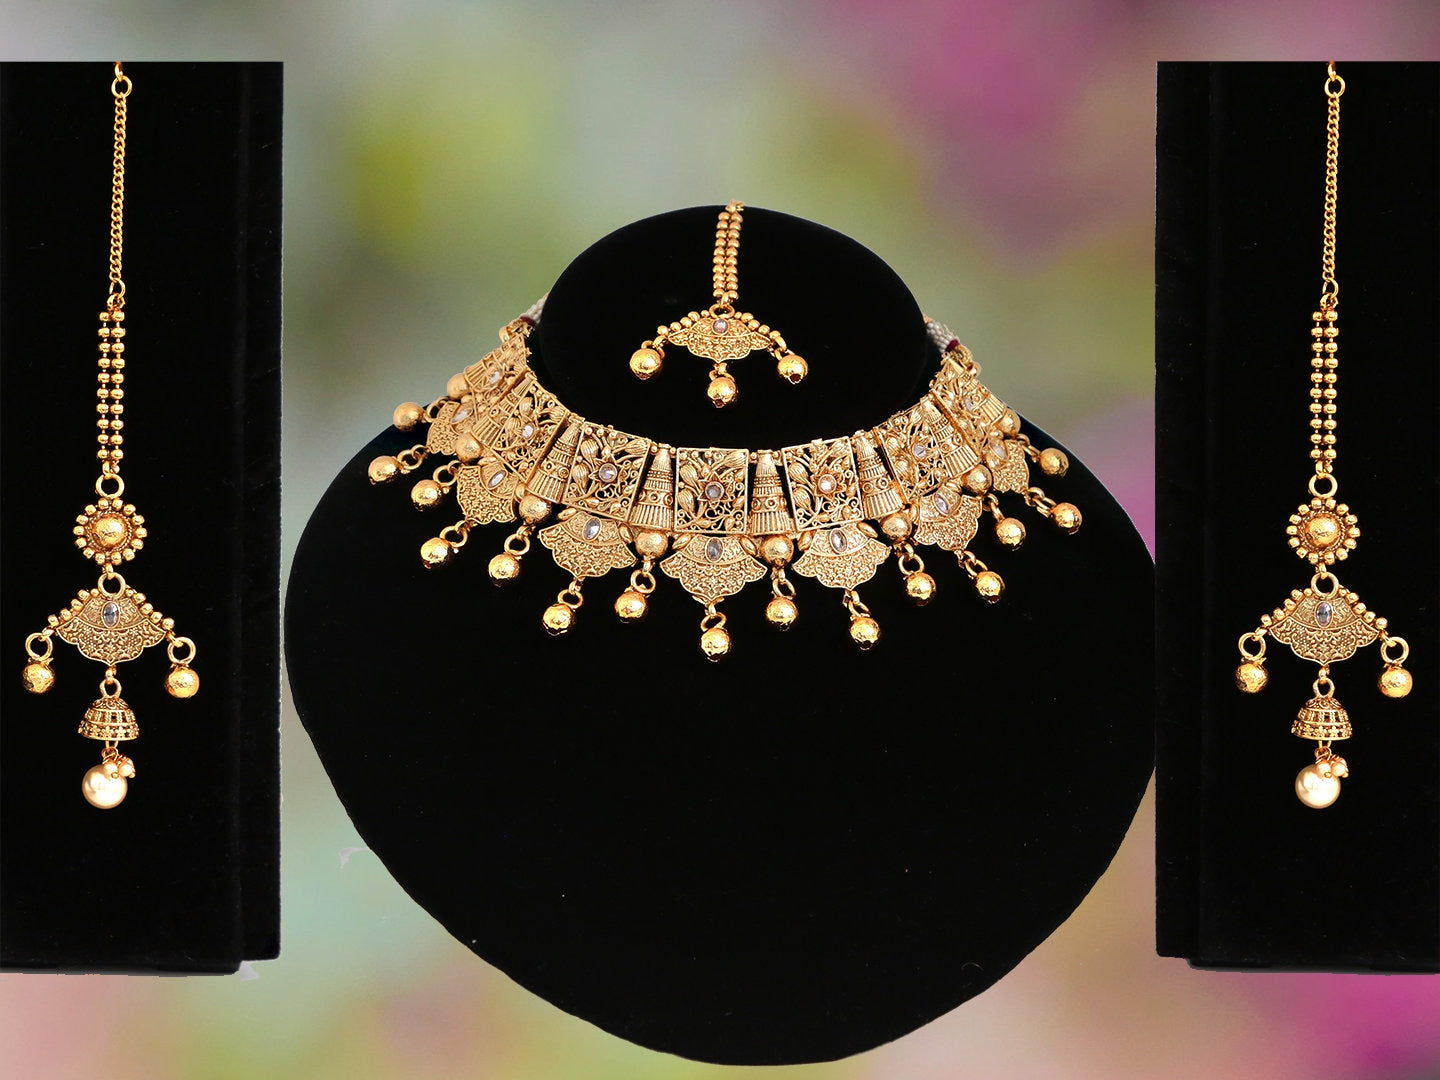 Antique Choker necklace Earrings Matti and Tikka|Gold plated 22Kt Bollywood Jewelry with Clear AD Stones|Bridal Indian Jewelry